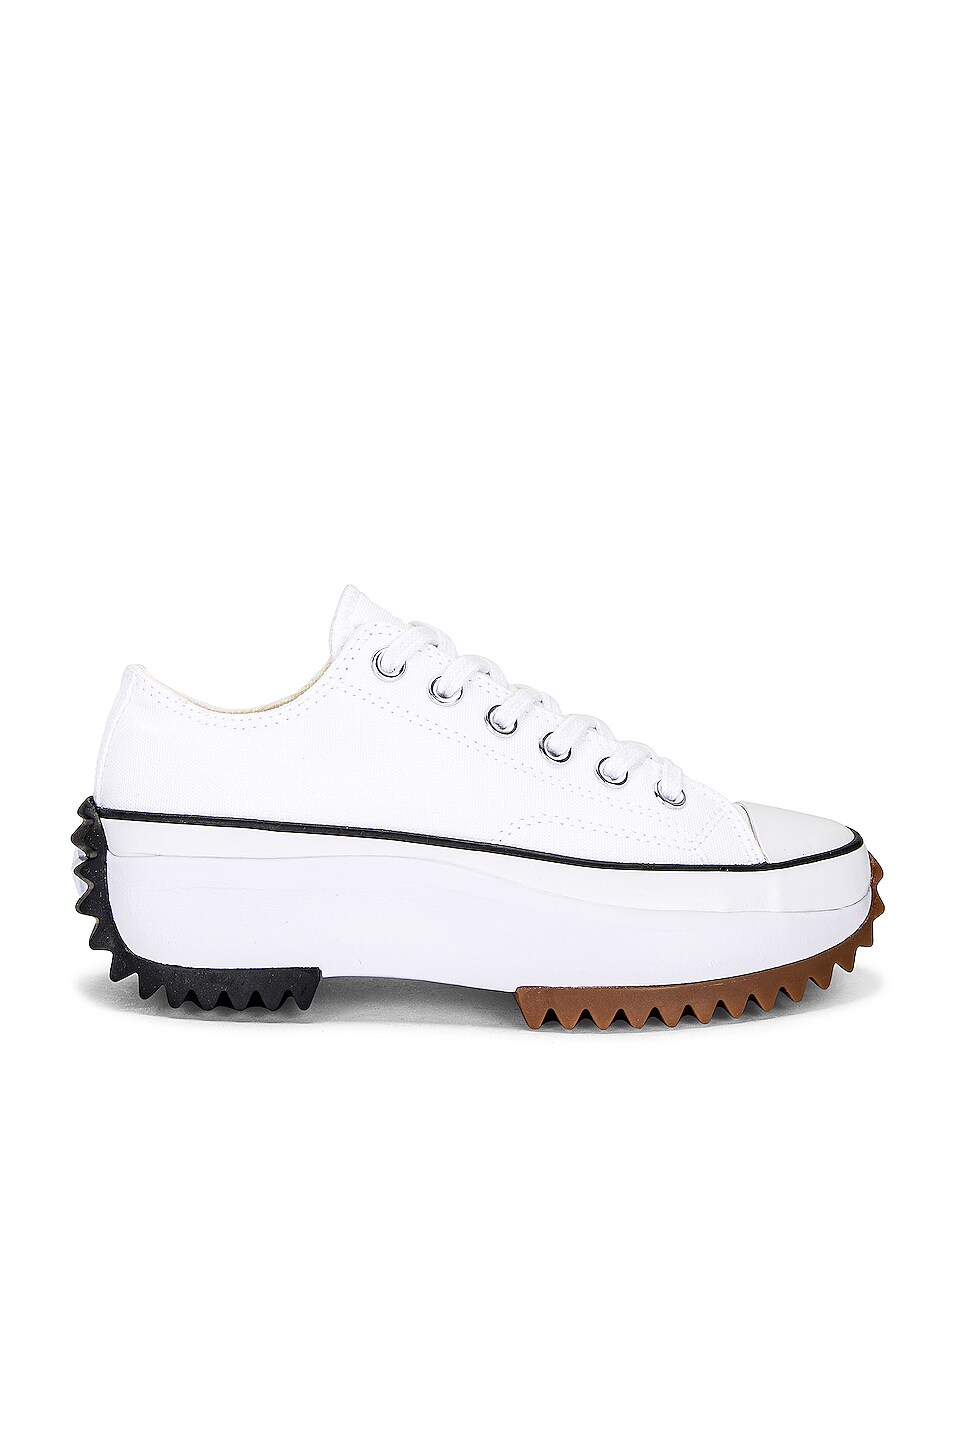 Image 1 of Converse Run Star Hike Canvas Platform Low Tops in White, Black, & Gum